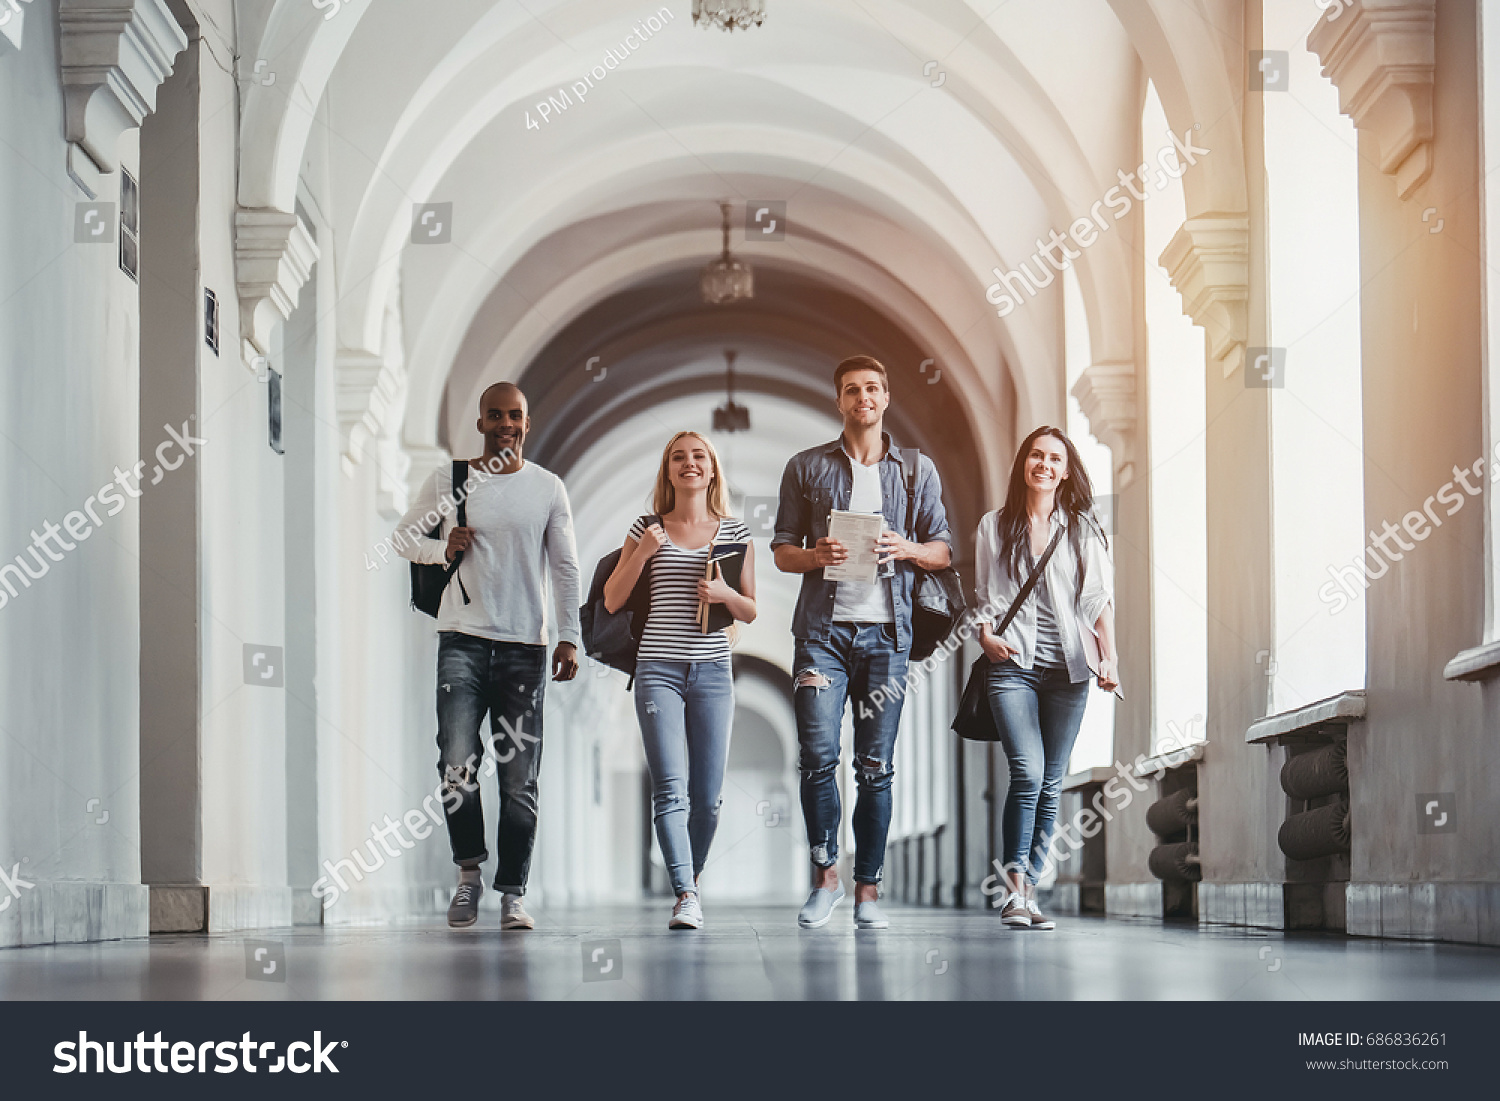 Multiracial students are walking in university hall during break. #686836261